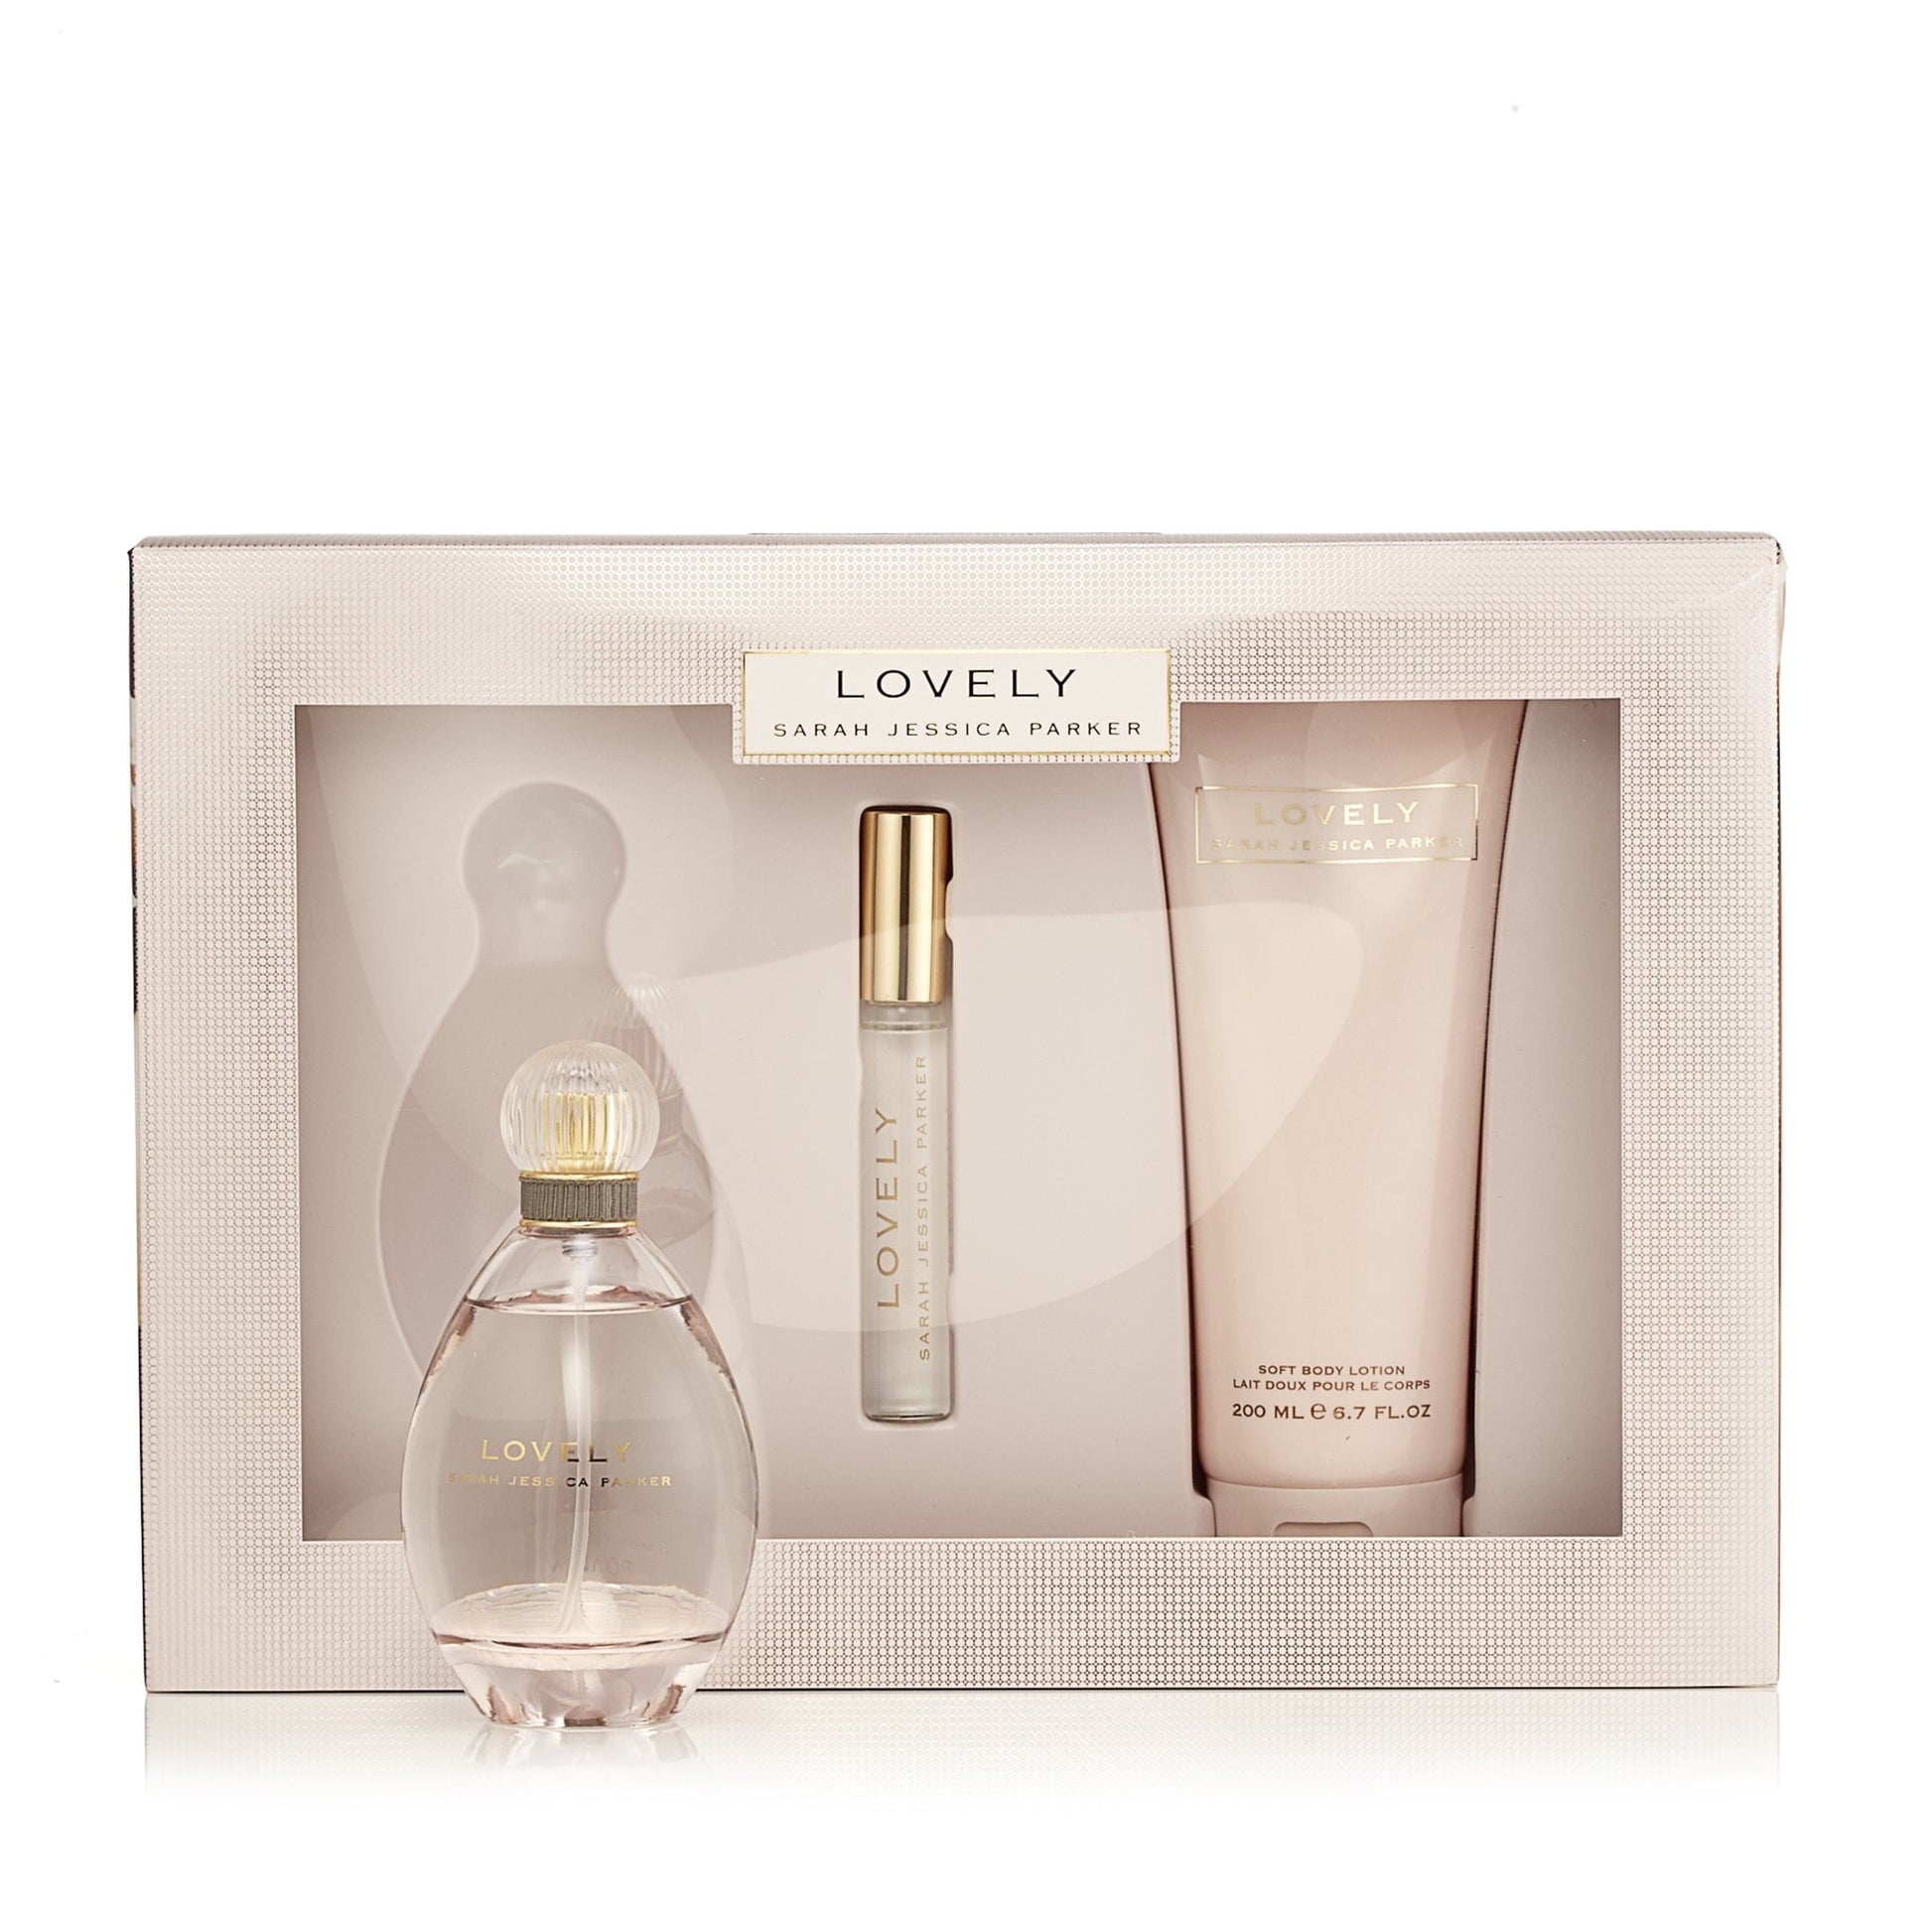 Lovely Gift Set for Women by Sarah Jessica Parker 3.4 oz. Click to open in modal